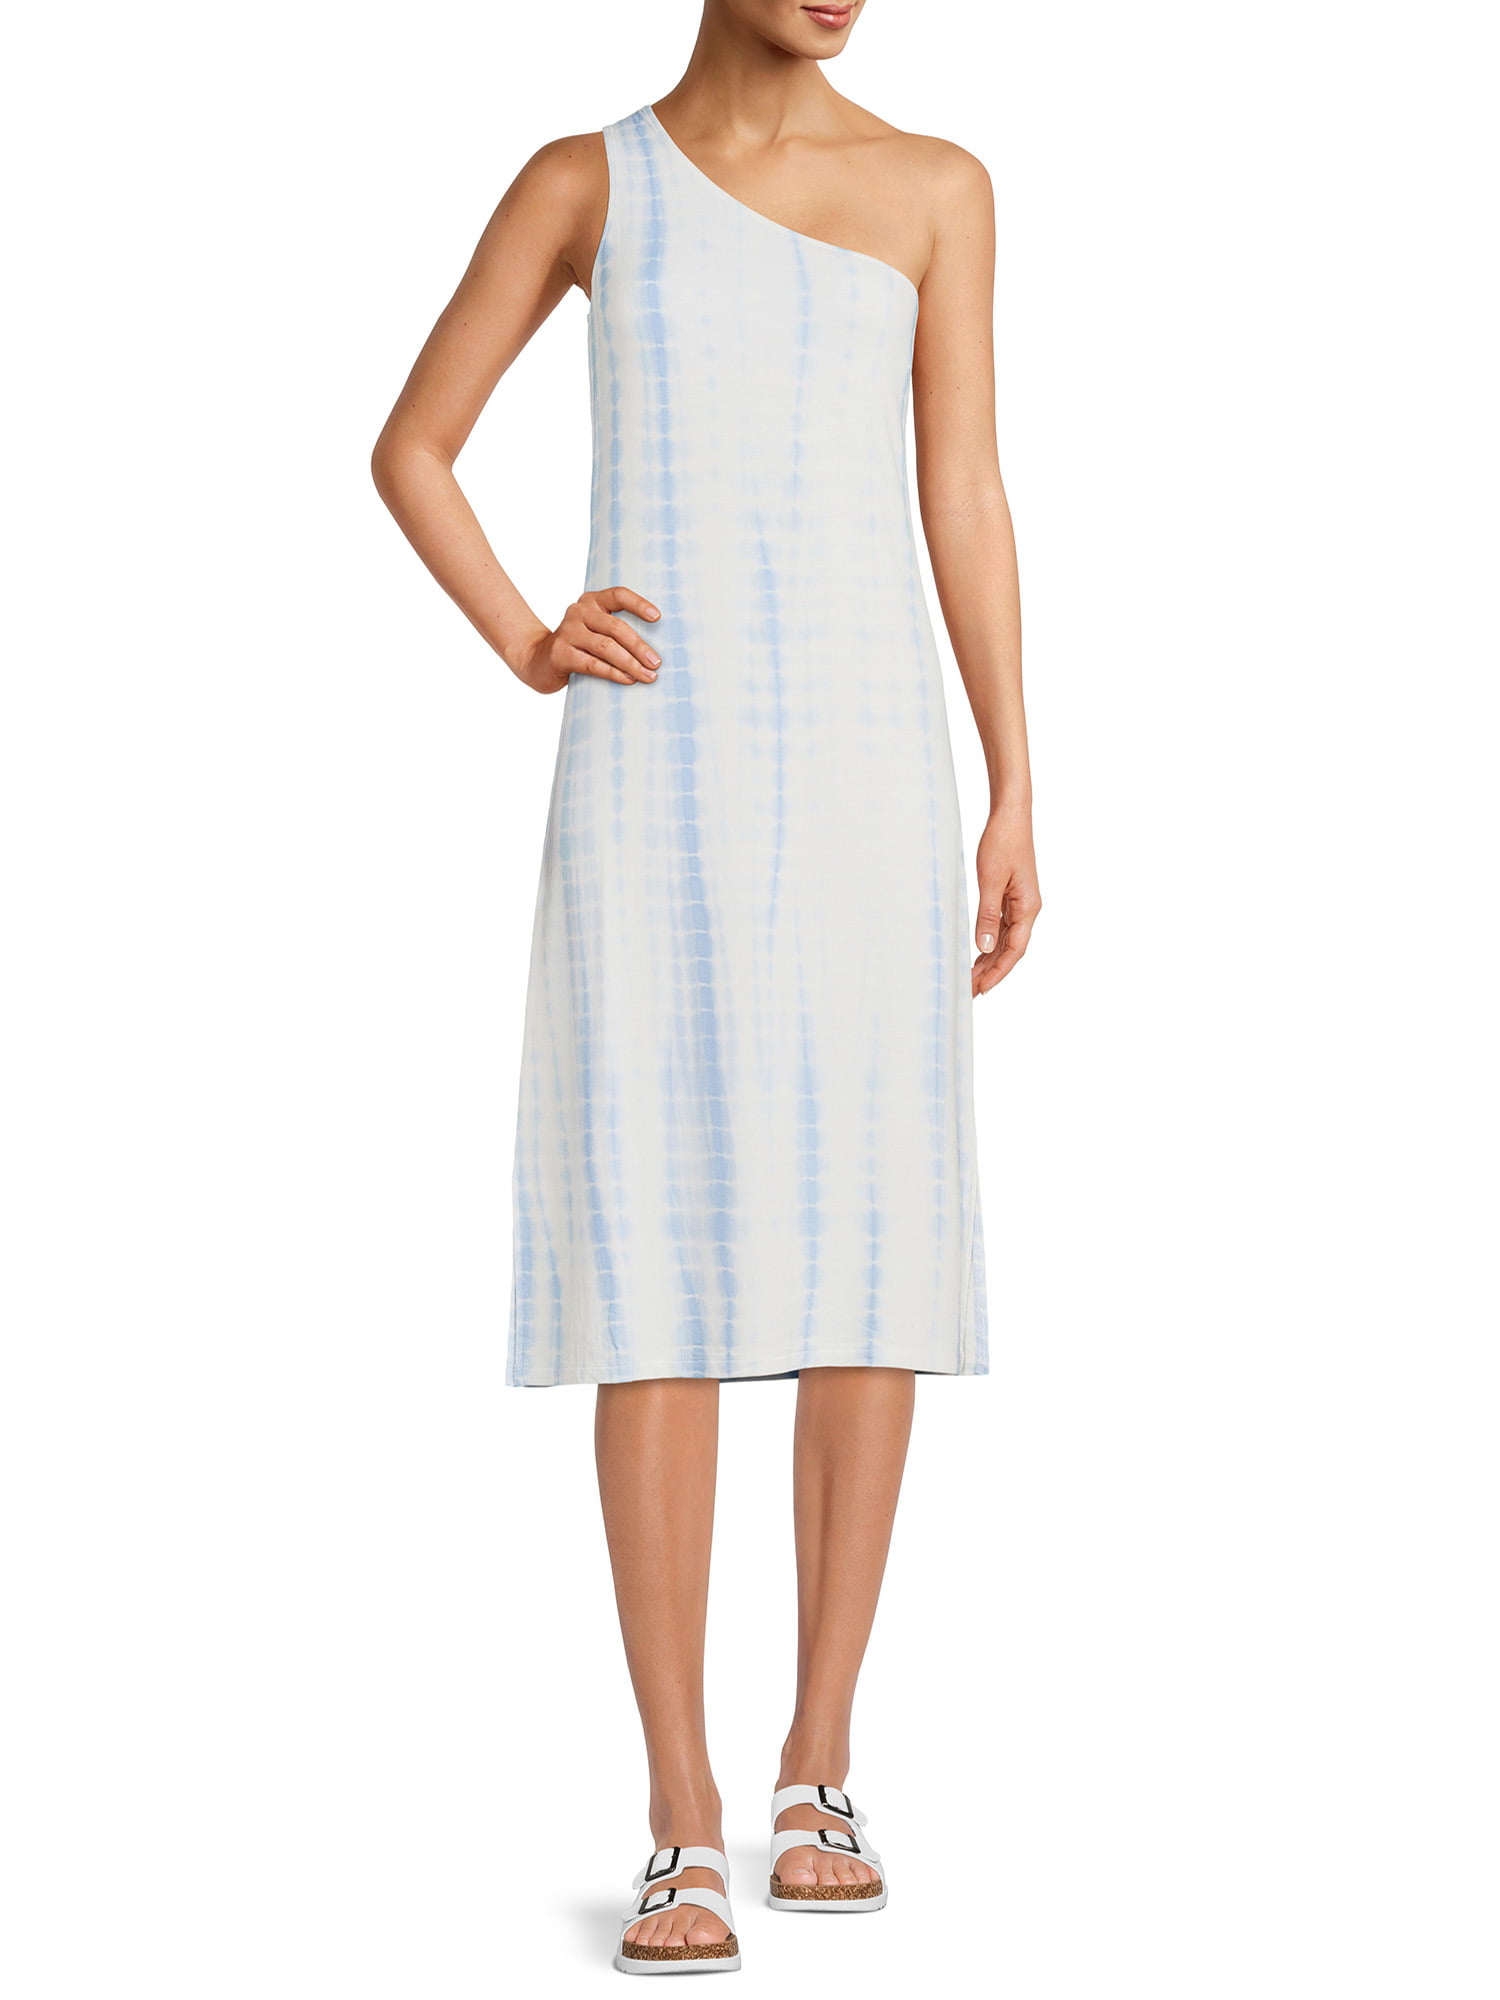 Time and Tru Women's One-Shoulder Tie-Dye Dress (3 Colors) $8.98 + Free S&H w/ Walmart+ or $35+